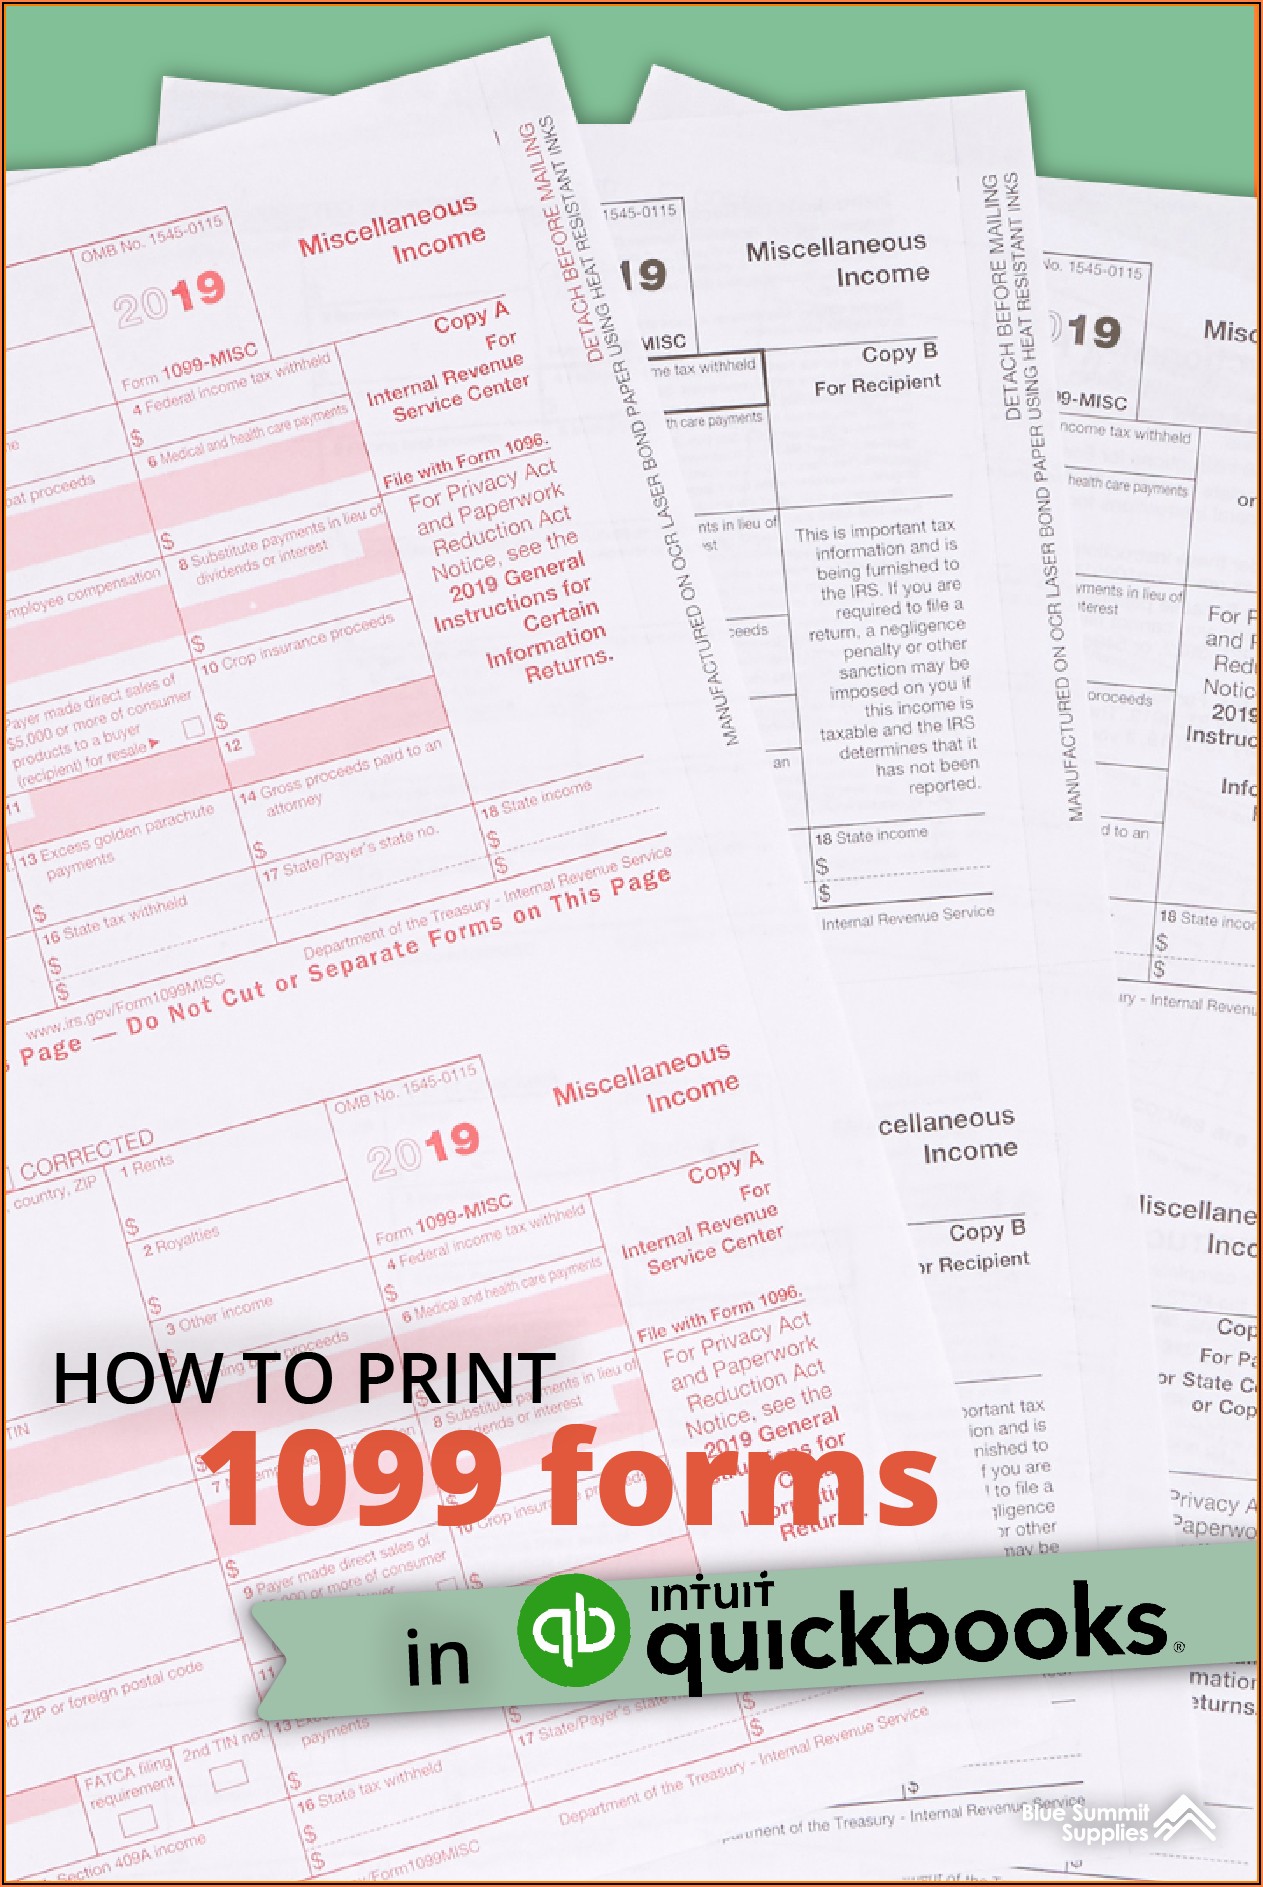 Print 1099 Forms In Quickbooks Online